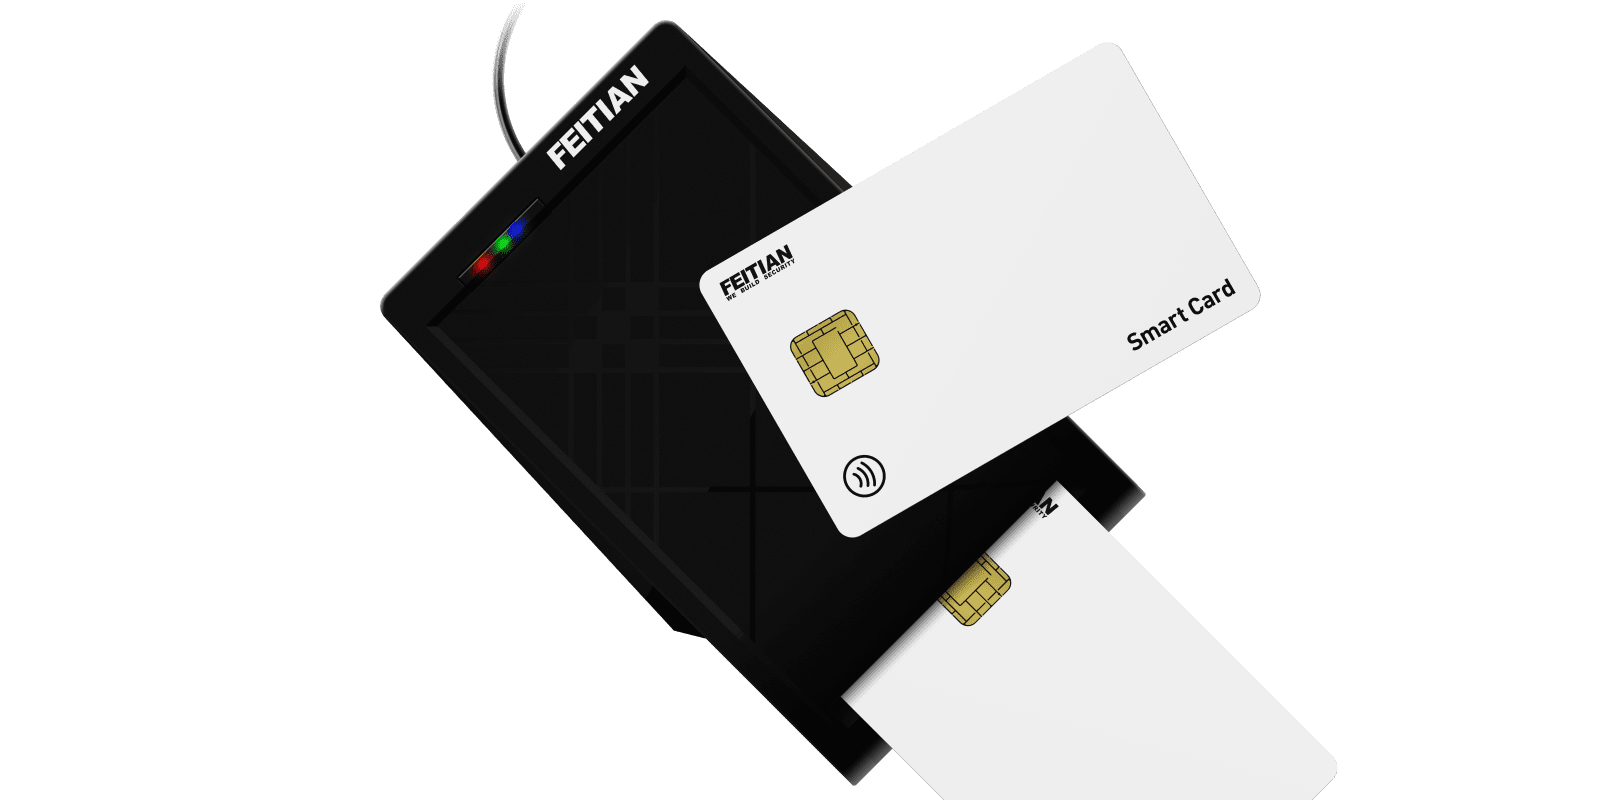 FEITIAN R502 Dual Interface Smart Card Reader supports to reading both contact Class A,B and C card (compatible with ISO 7816-1/2/3 T=0 and T=1) and contactless card (compatible with ISO 14443  TypeA and B)